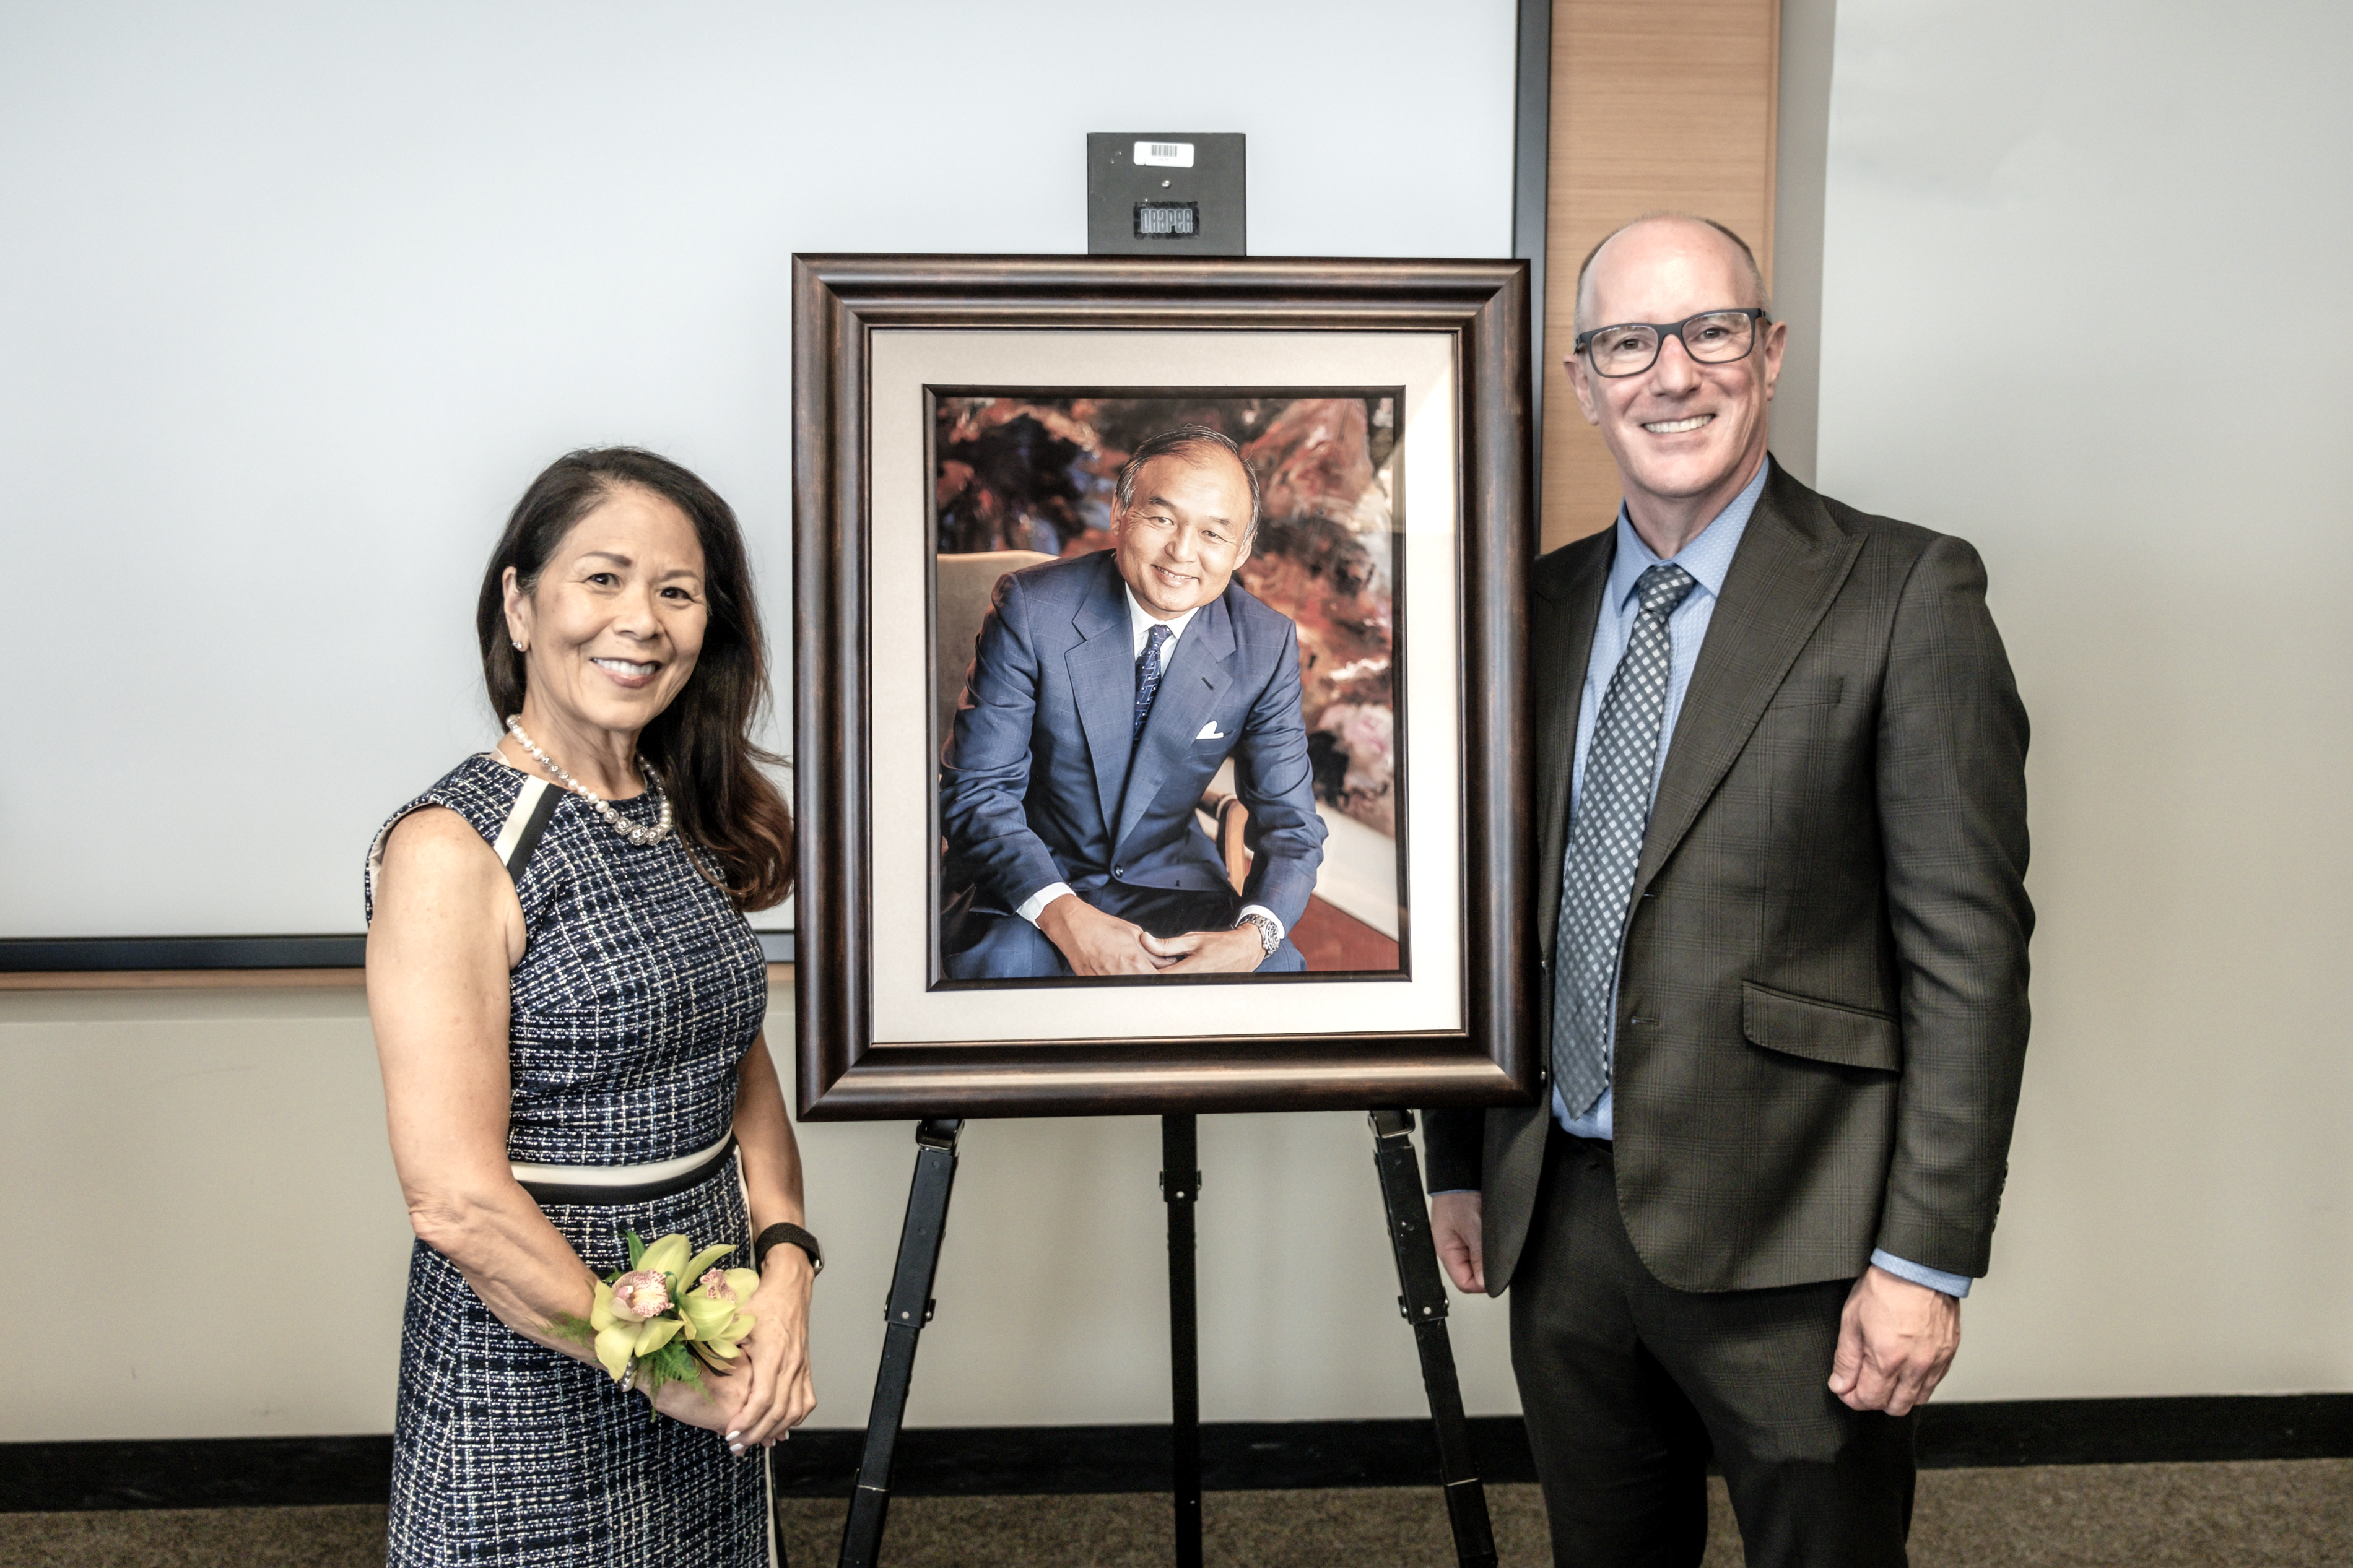 Donette Chin-Loy Chang, Communications Strategist and Philanthropist, and Gary Hepburn, Dean of The Chang School